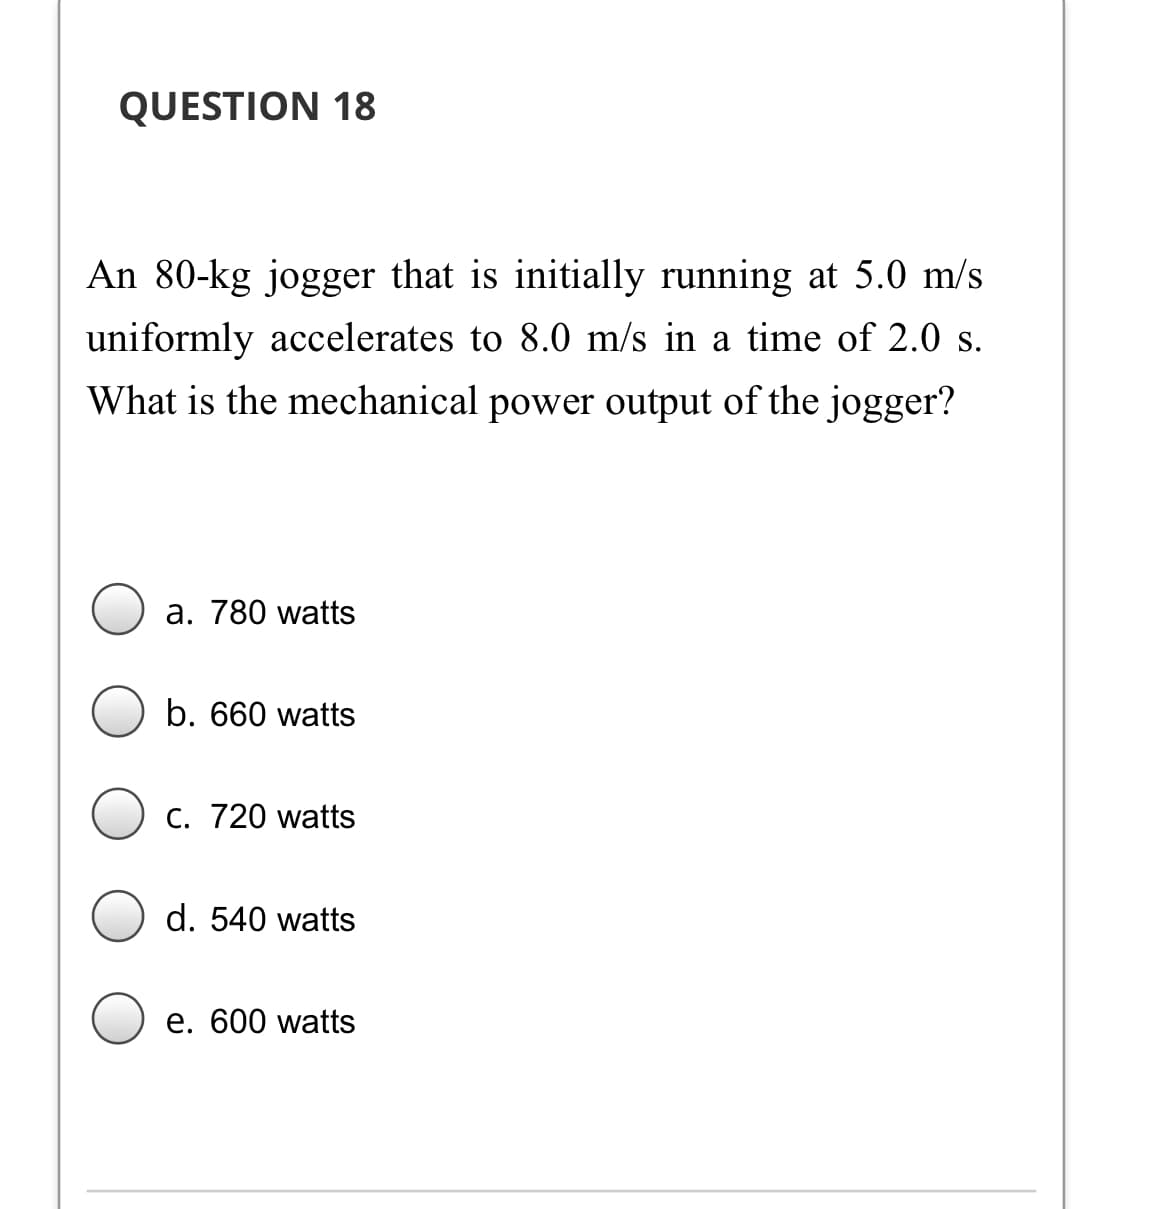 QUESTION 18
An 80-kg jogger that is initially running at 5.0 m/s
uniformly accelerates to 8.0 m/s in a time of 2.0 s.
What is the mechanical power output of the jogger?
а. 780 watts
b. 660 watts
С. 720 watts
d. 540 watts
e. 600 watts
